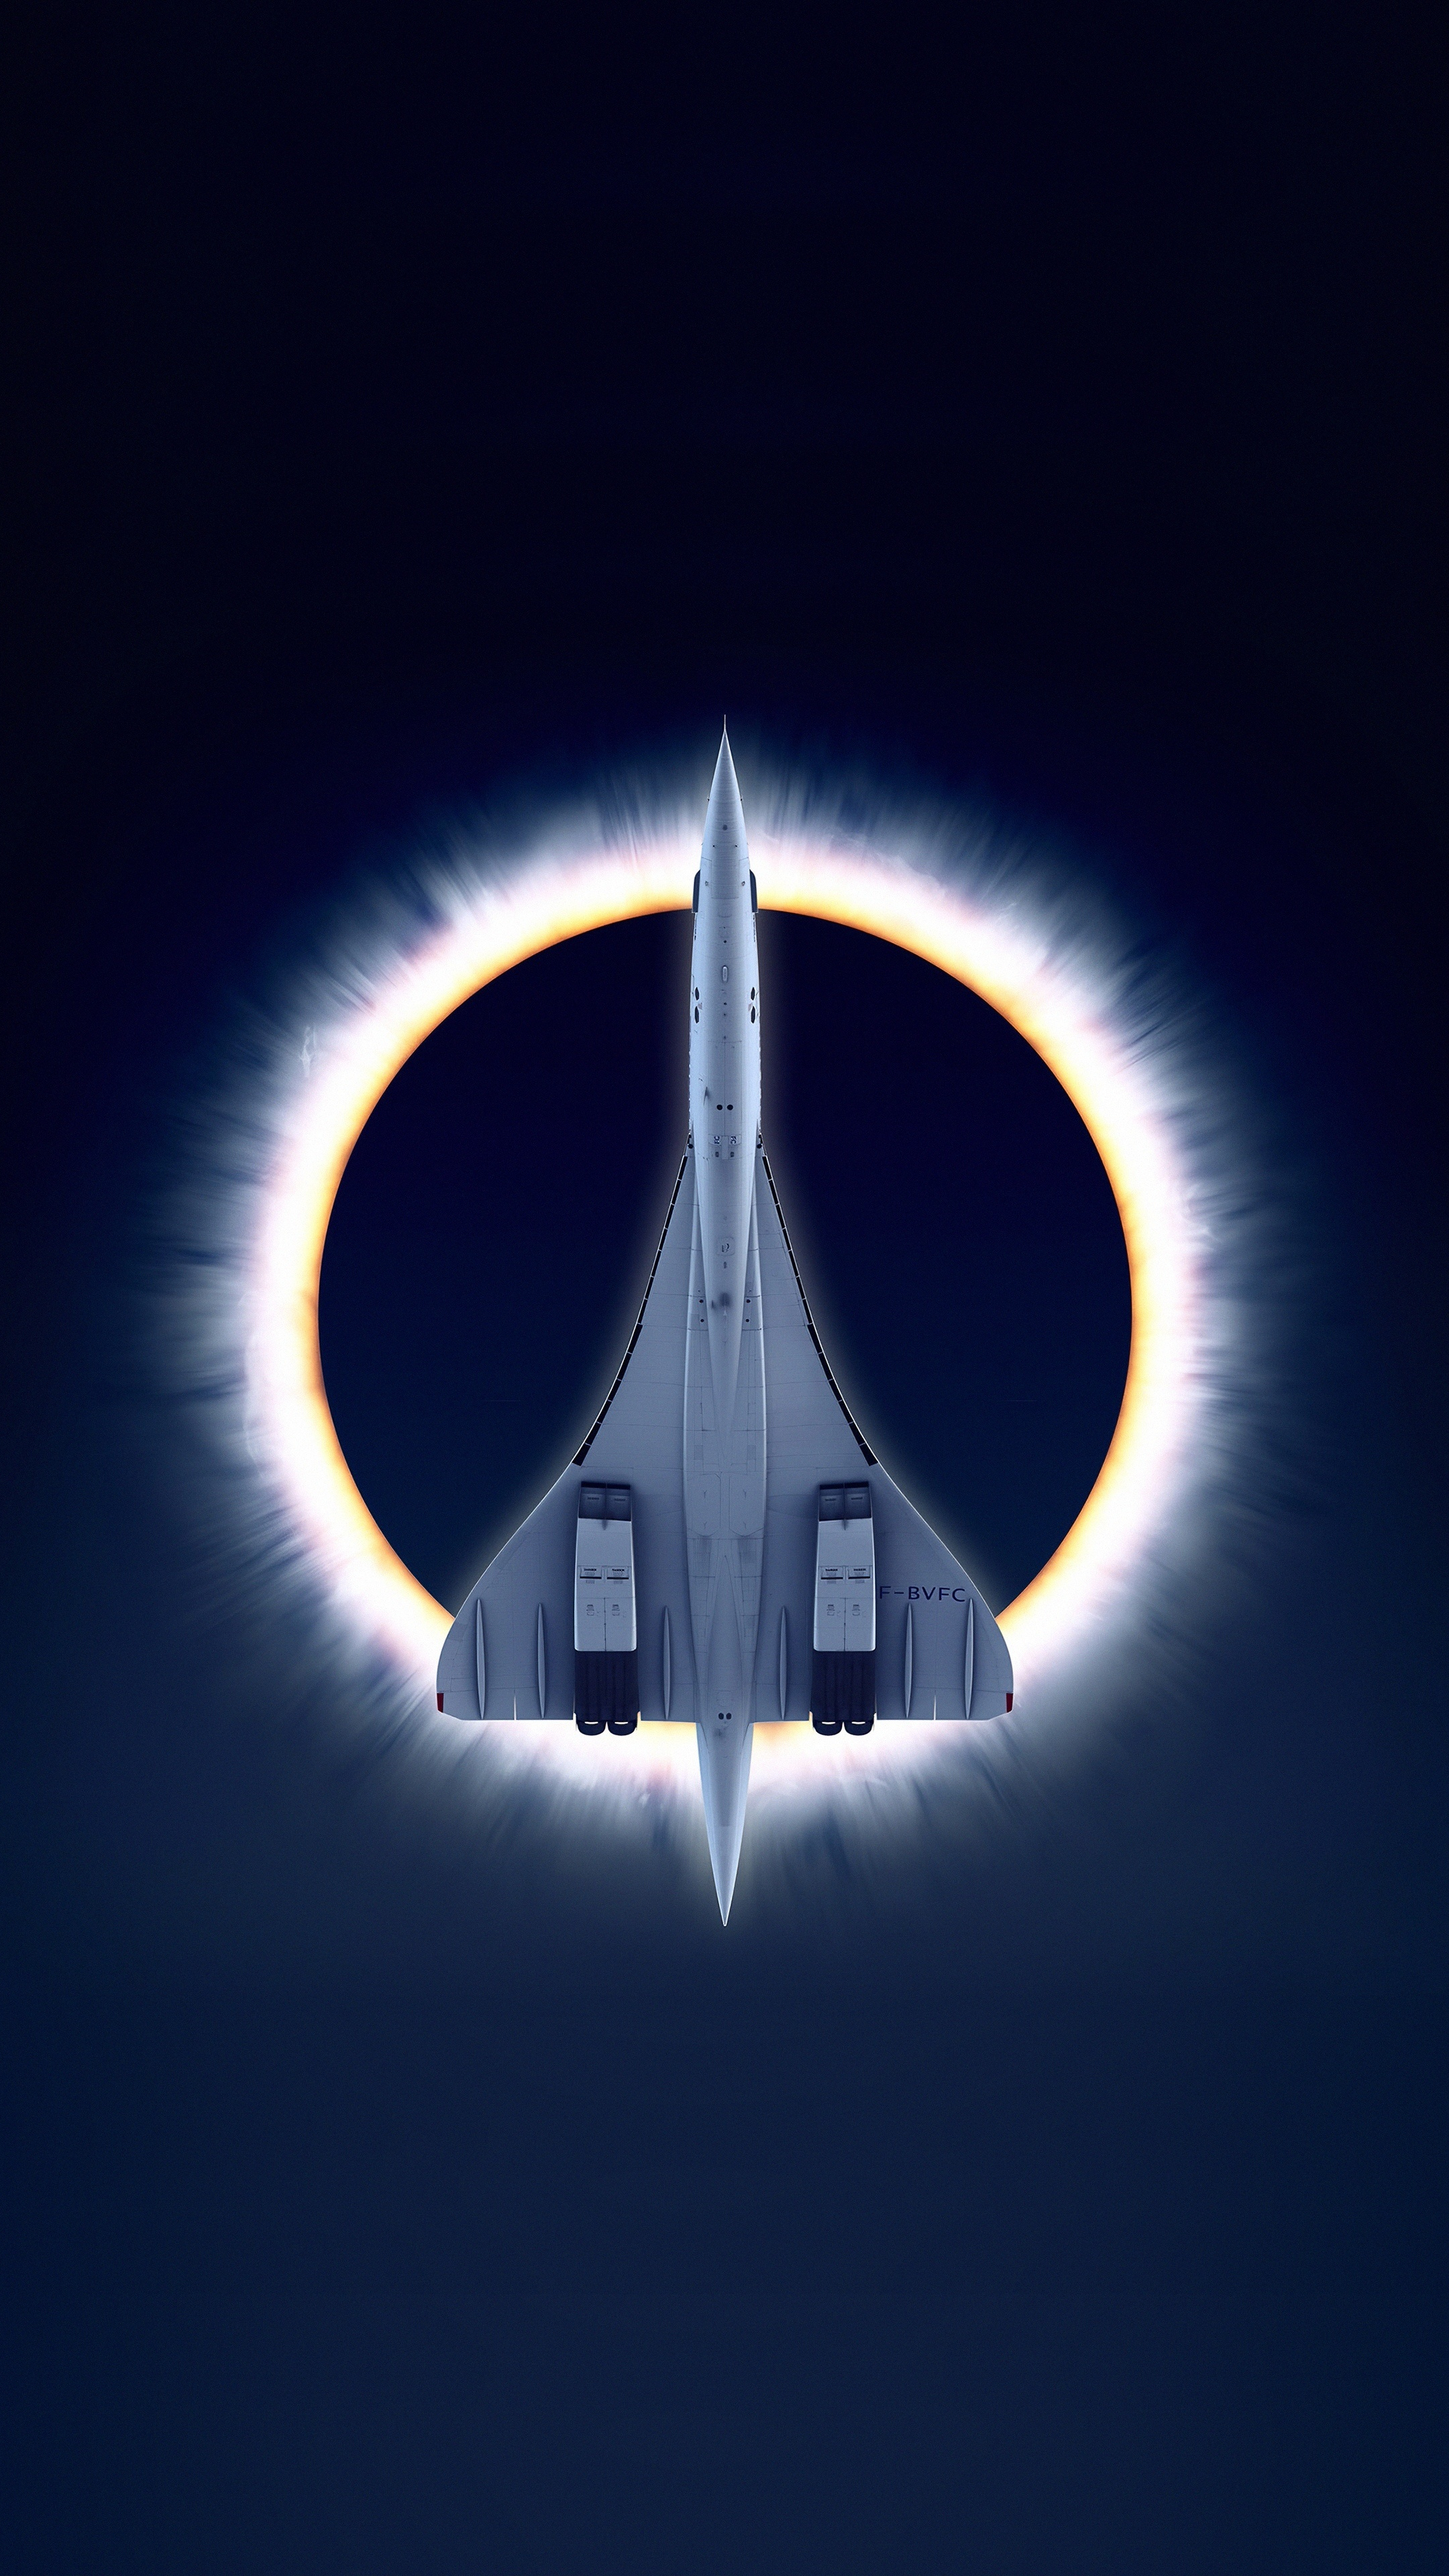 Concorde Carre, eclipse, airplane, moon, aircraft, 2160x3840 wallpaper